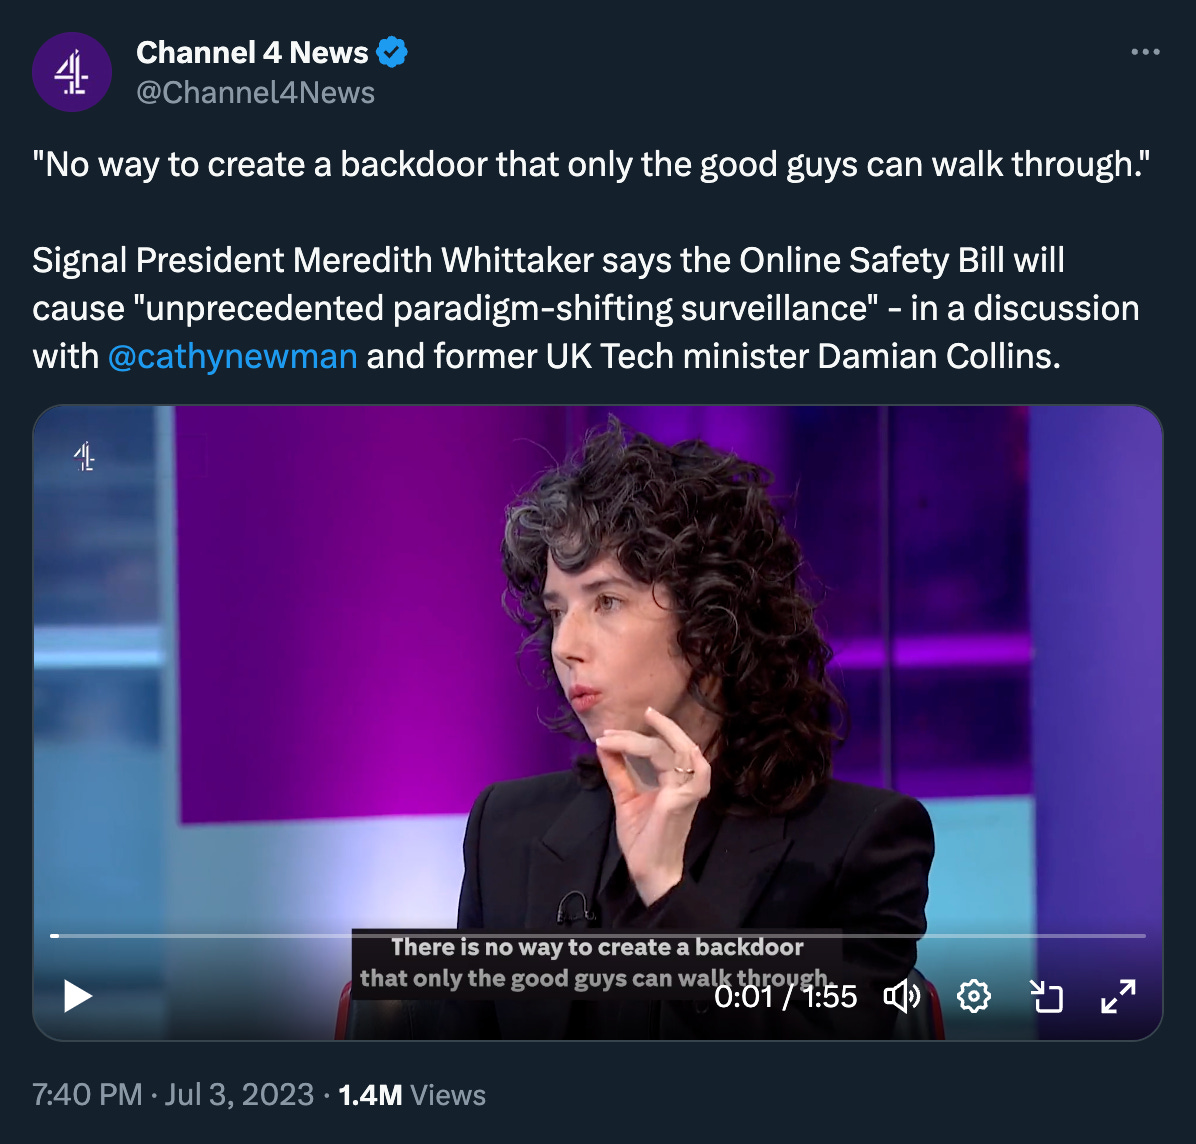 Screenshot of a tweet from Channel 4 News. It's a video featuring Meredith Whittaker. Caption: "No way to create a backdoor that only the good guys can walk through."  Signal President Meredith Whittaker says the Online Safety Bill will cause "unprecedented paradigm-shifting surveillance" - in a discussion with  @cathynewman  and former UK Tech minister Damian Collins.